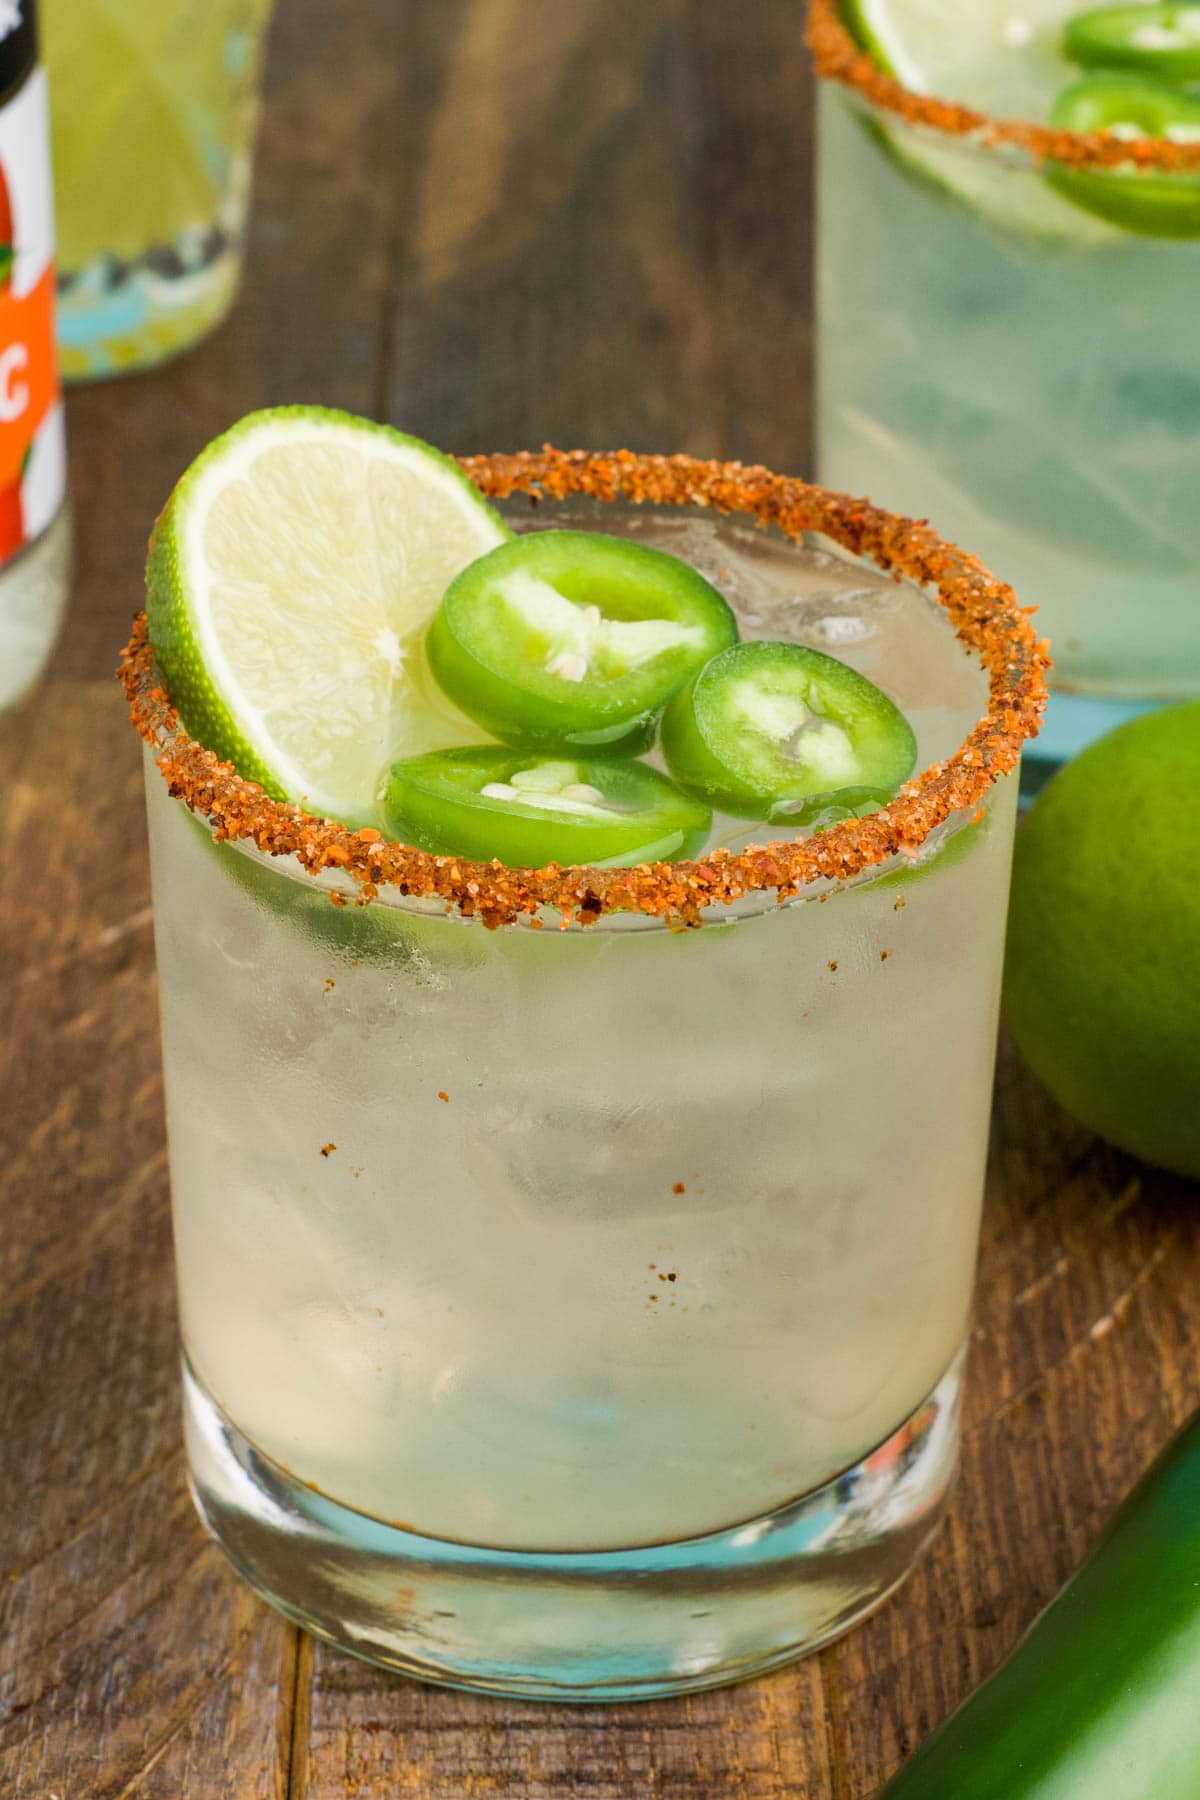 Margarita in a glass with jalapeno slices, lime slices and tajin on the rim.